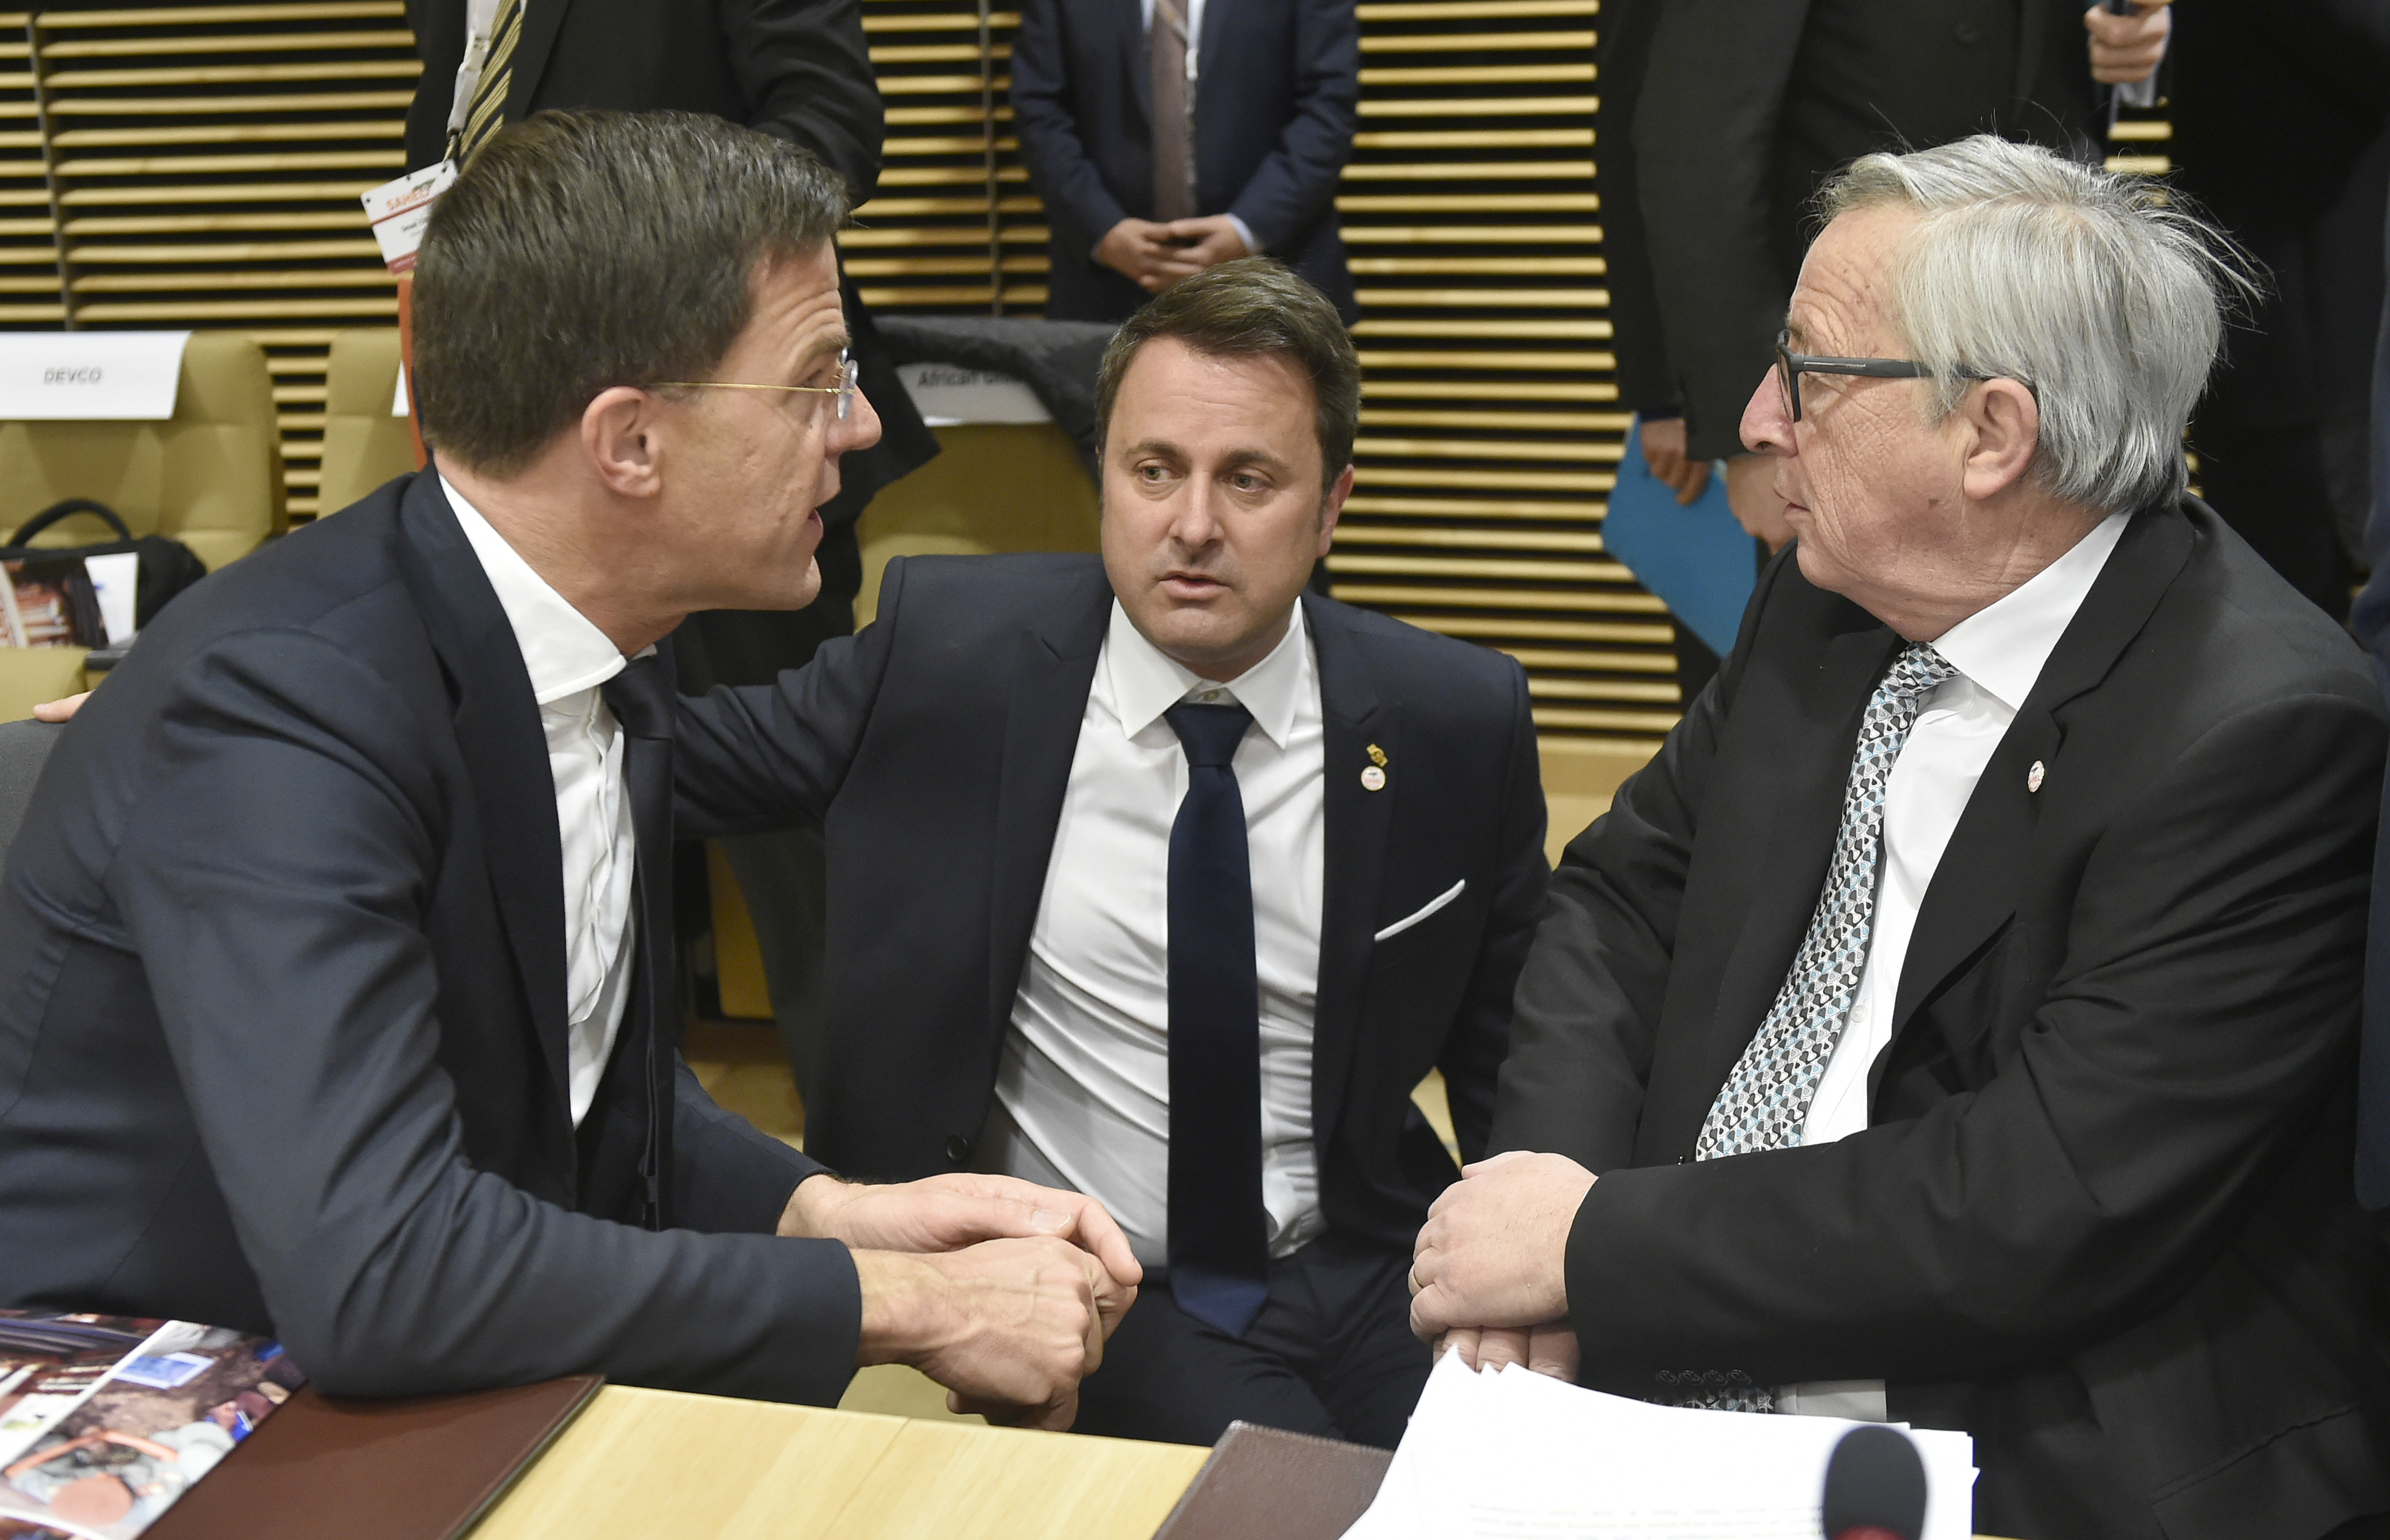 Dutch Prime Minister Mark Rutte, left, speaks with Luxembourg's Prime Minister Xavier Bettel, center, and European Commission President Jean-Claude Juncker during a round table meeting of the EU-Sahel at EU headquarters in Brussels on Friday, Feb. 23, 2018. European Union leaders meet Friday with counterparts from Africa's Sahel in a show of support for the impoverished region fallen prey to extremists and a key transit point for migrants heading to Europe. (John Thys, Pool Photo via AP)